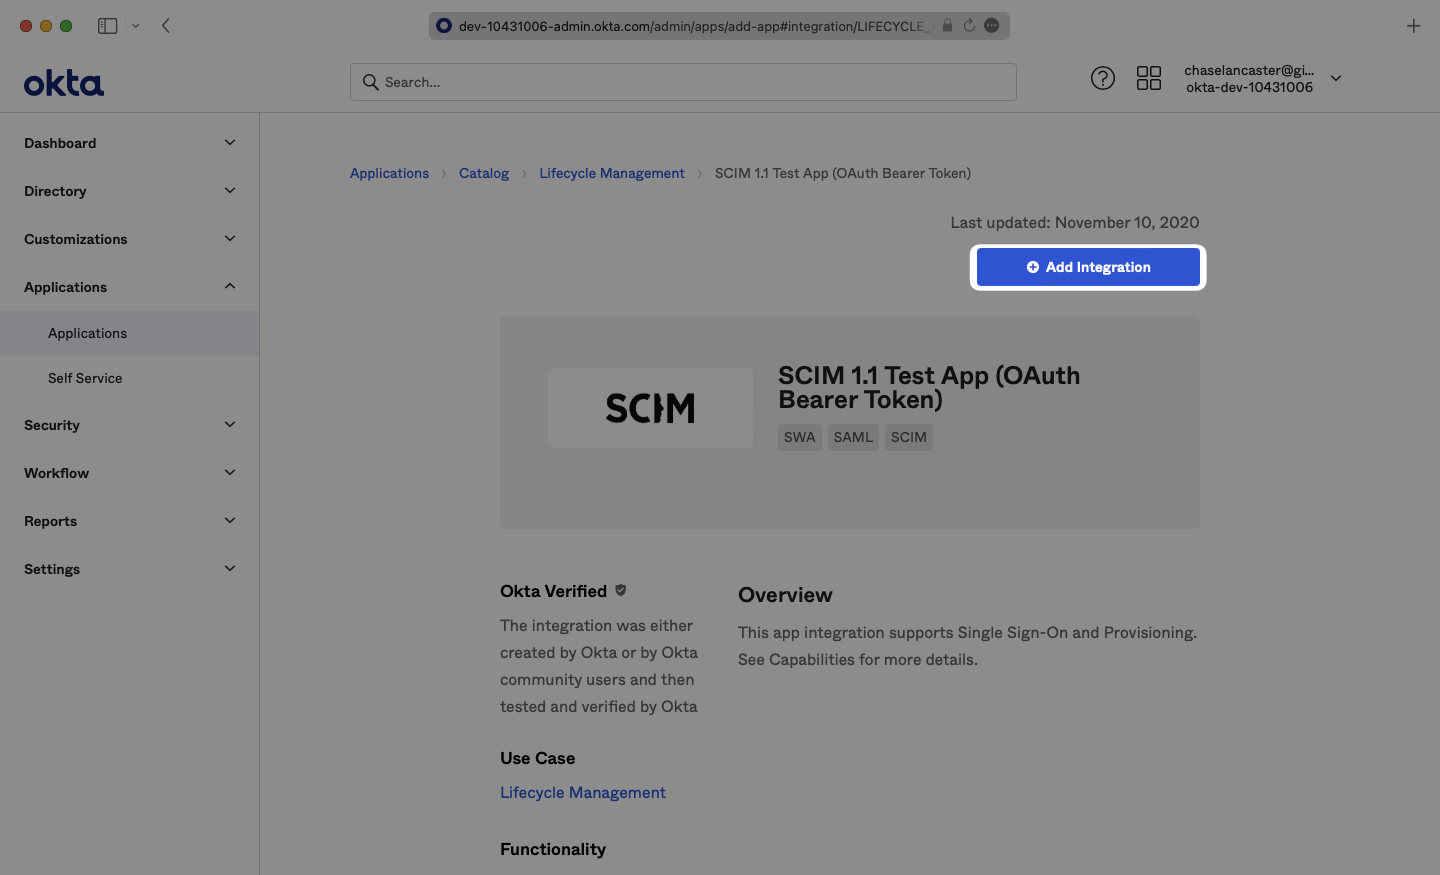 A screnshot showing where to click "Add Integration" in the SCIM 1.1 Test App (OAuth Bearer Token) overview page in Okta.